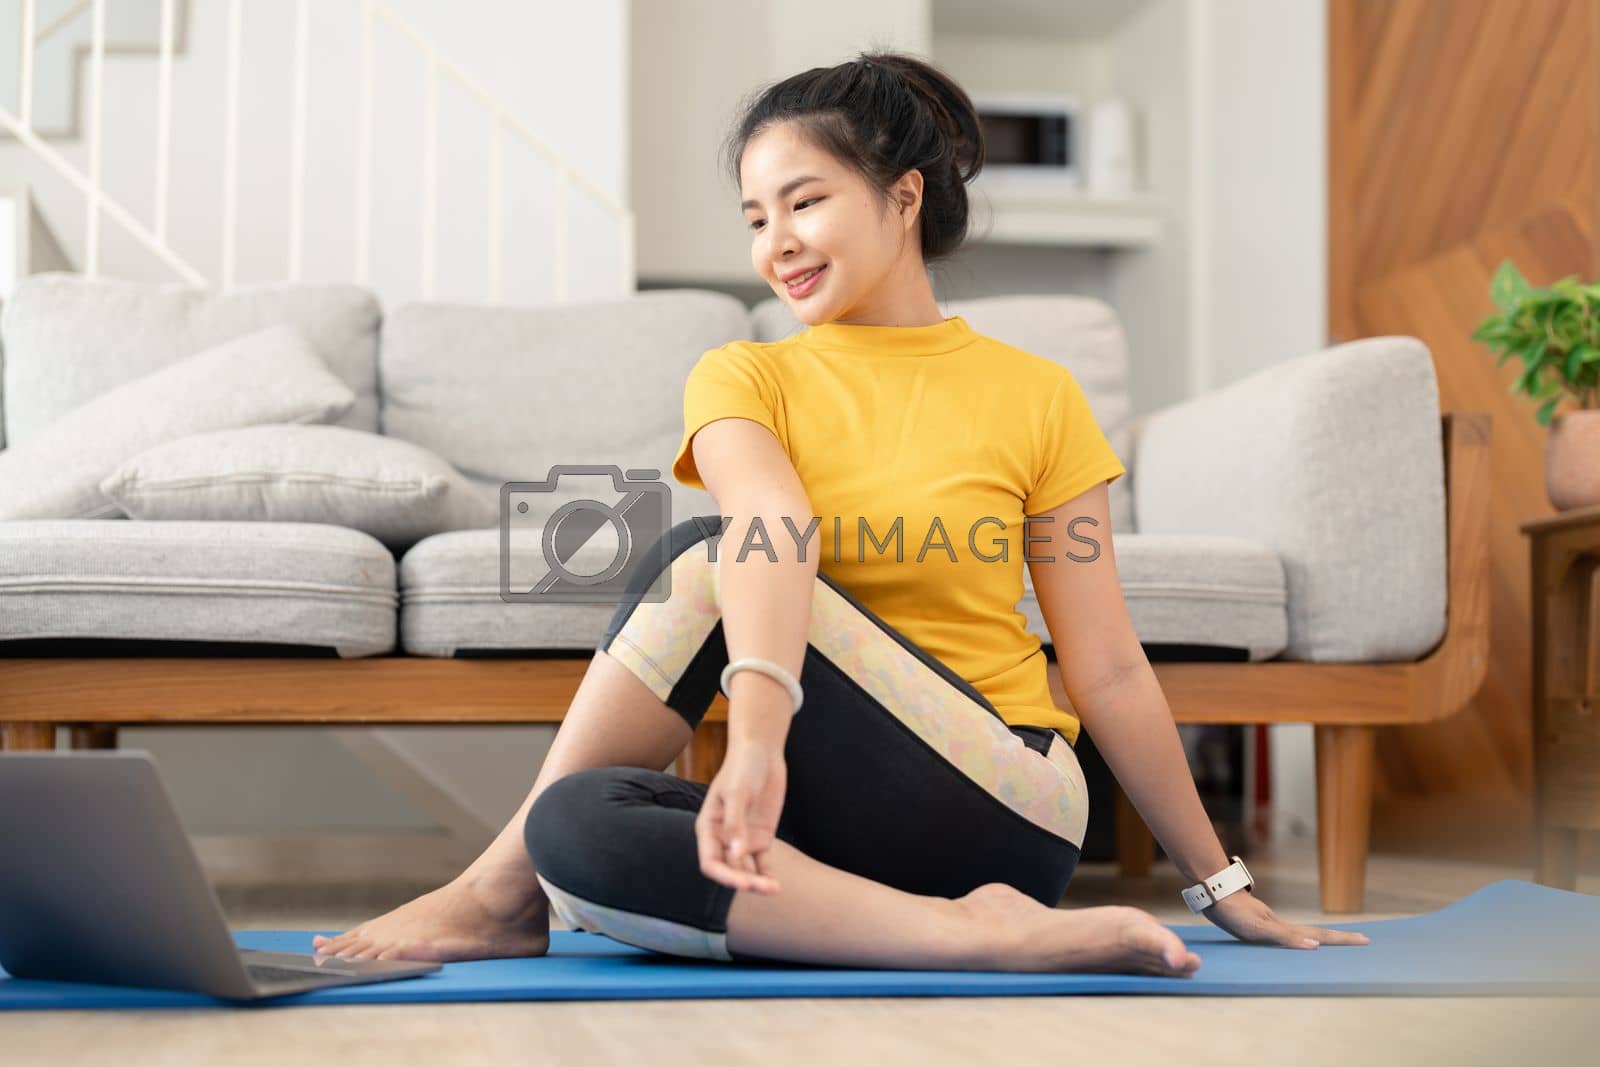 Royalty free image of Attractive young woman doing yoga stretching yoga online at home. Self-isolation is beneficial. Healthy lifestyle concept by nateemee